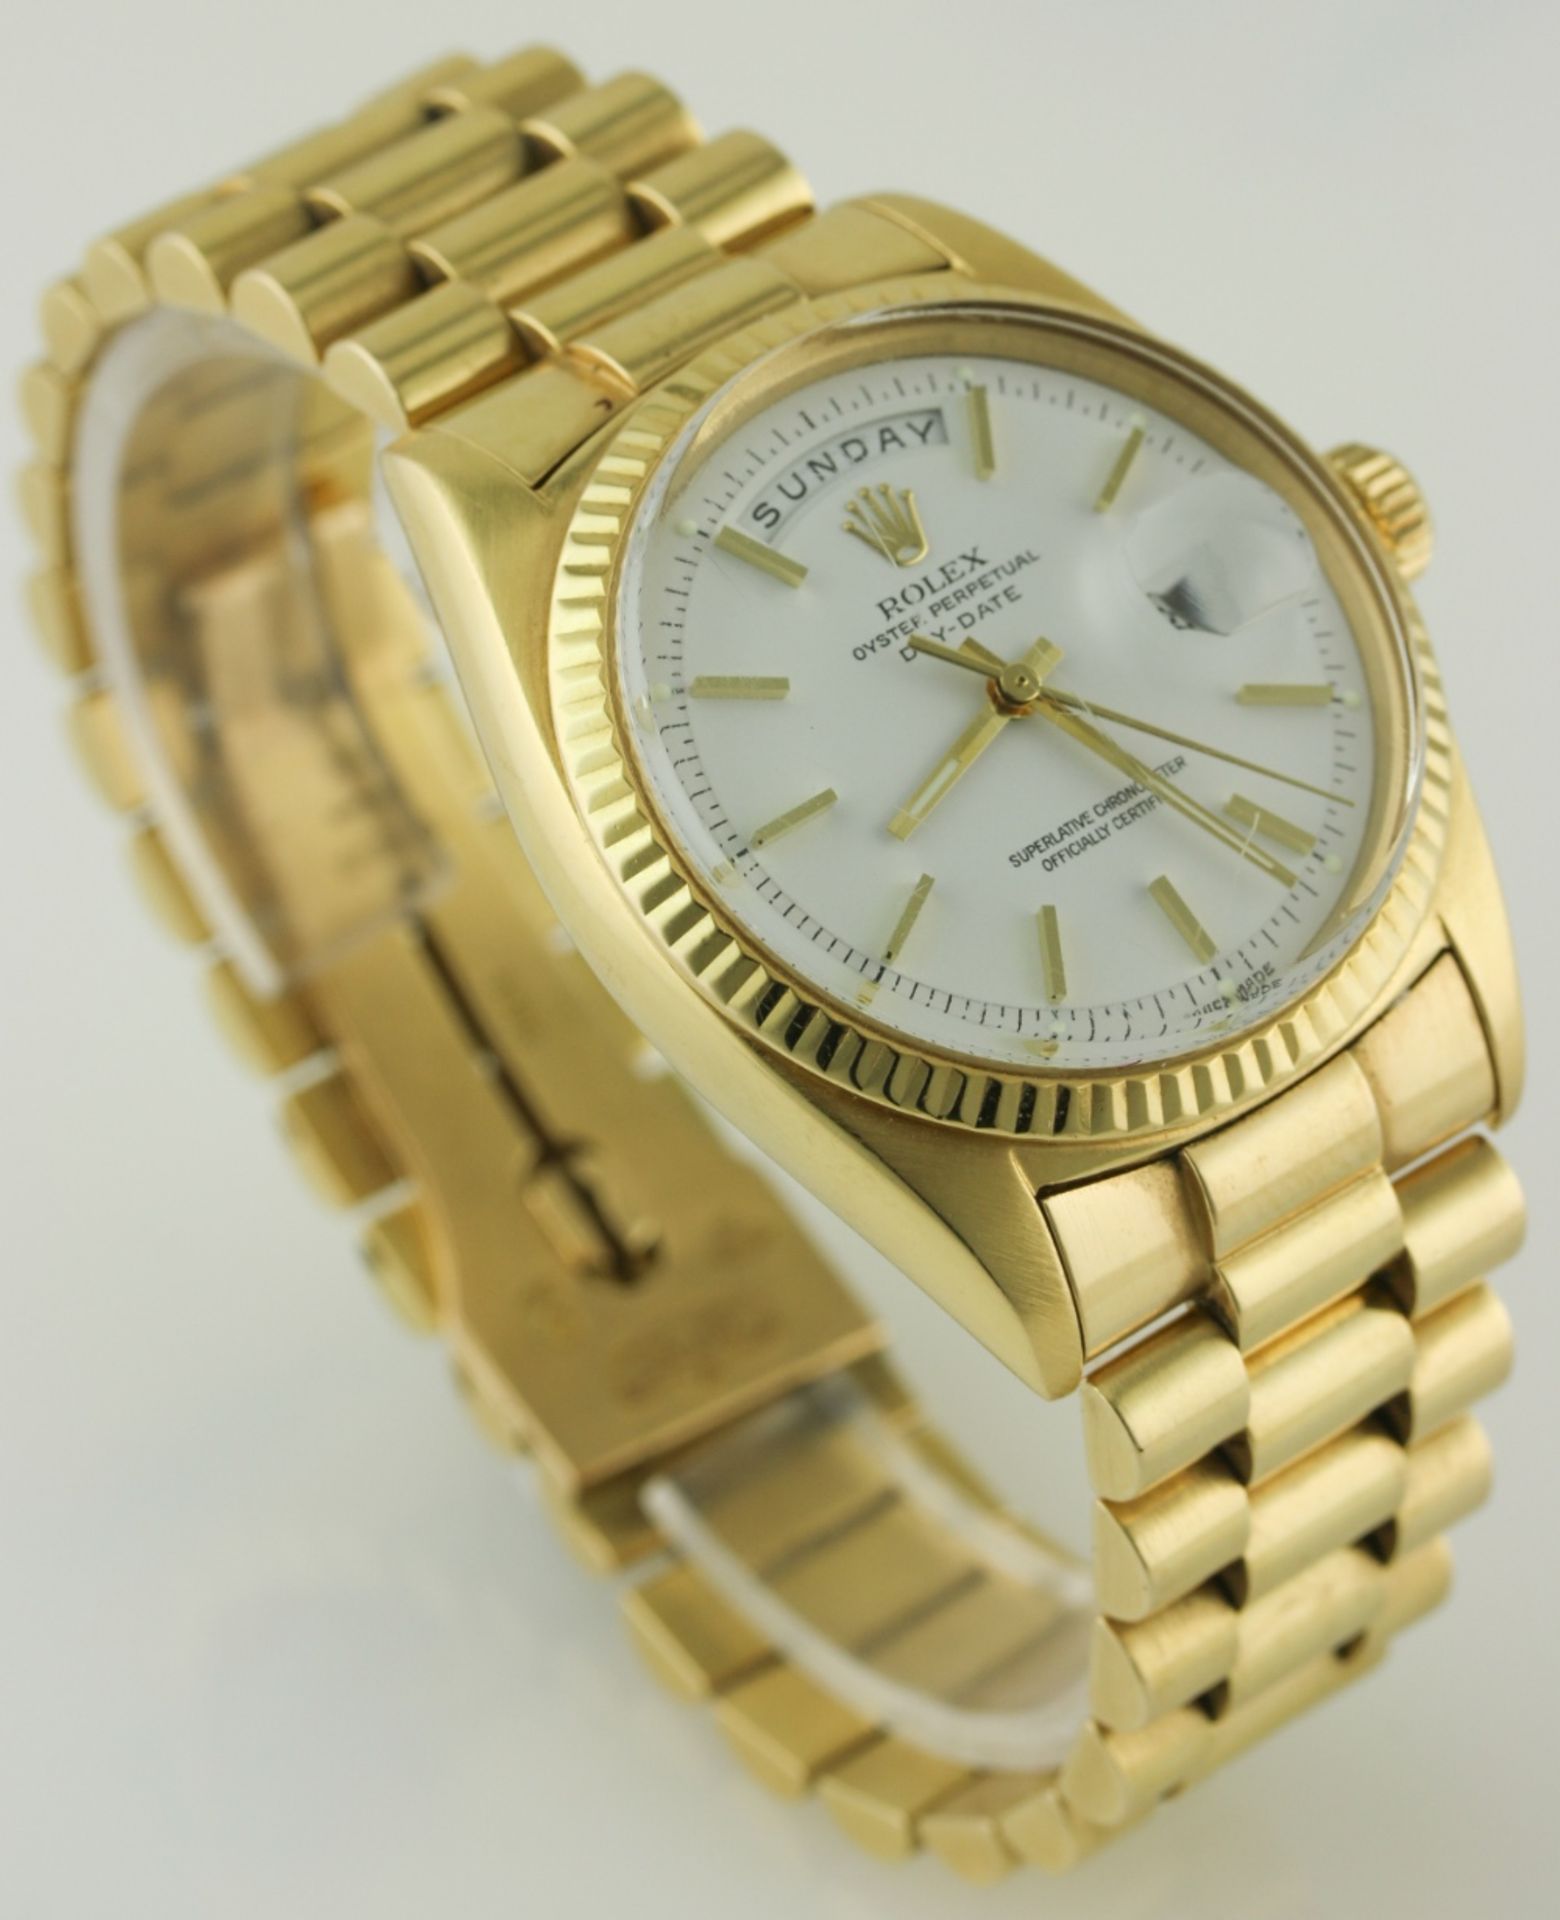 A GENTLEMAN'S 18K SOLID GOLD ROLEX OYSTER PERPETUAL DAY DATE BRACELET WATCH CIRCA 1969, REF. 1803
D: - Image 5 of 8